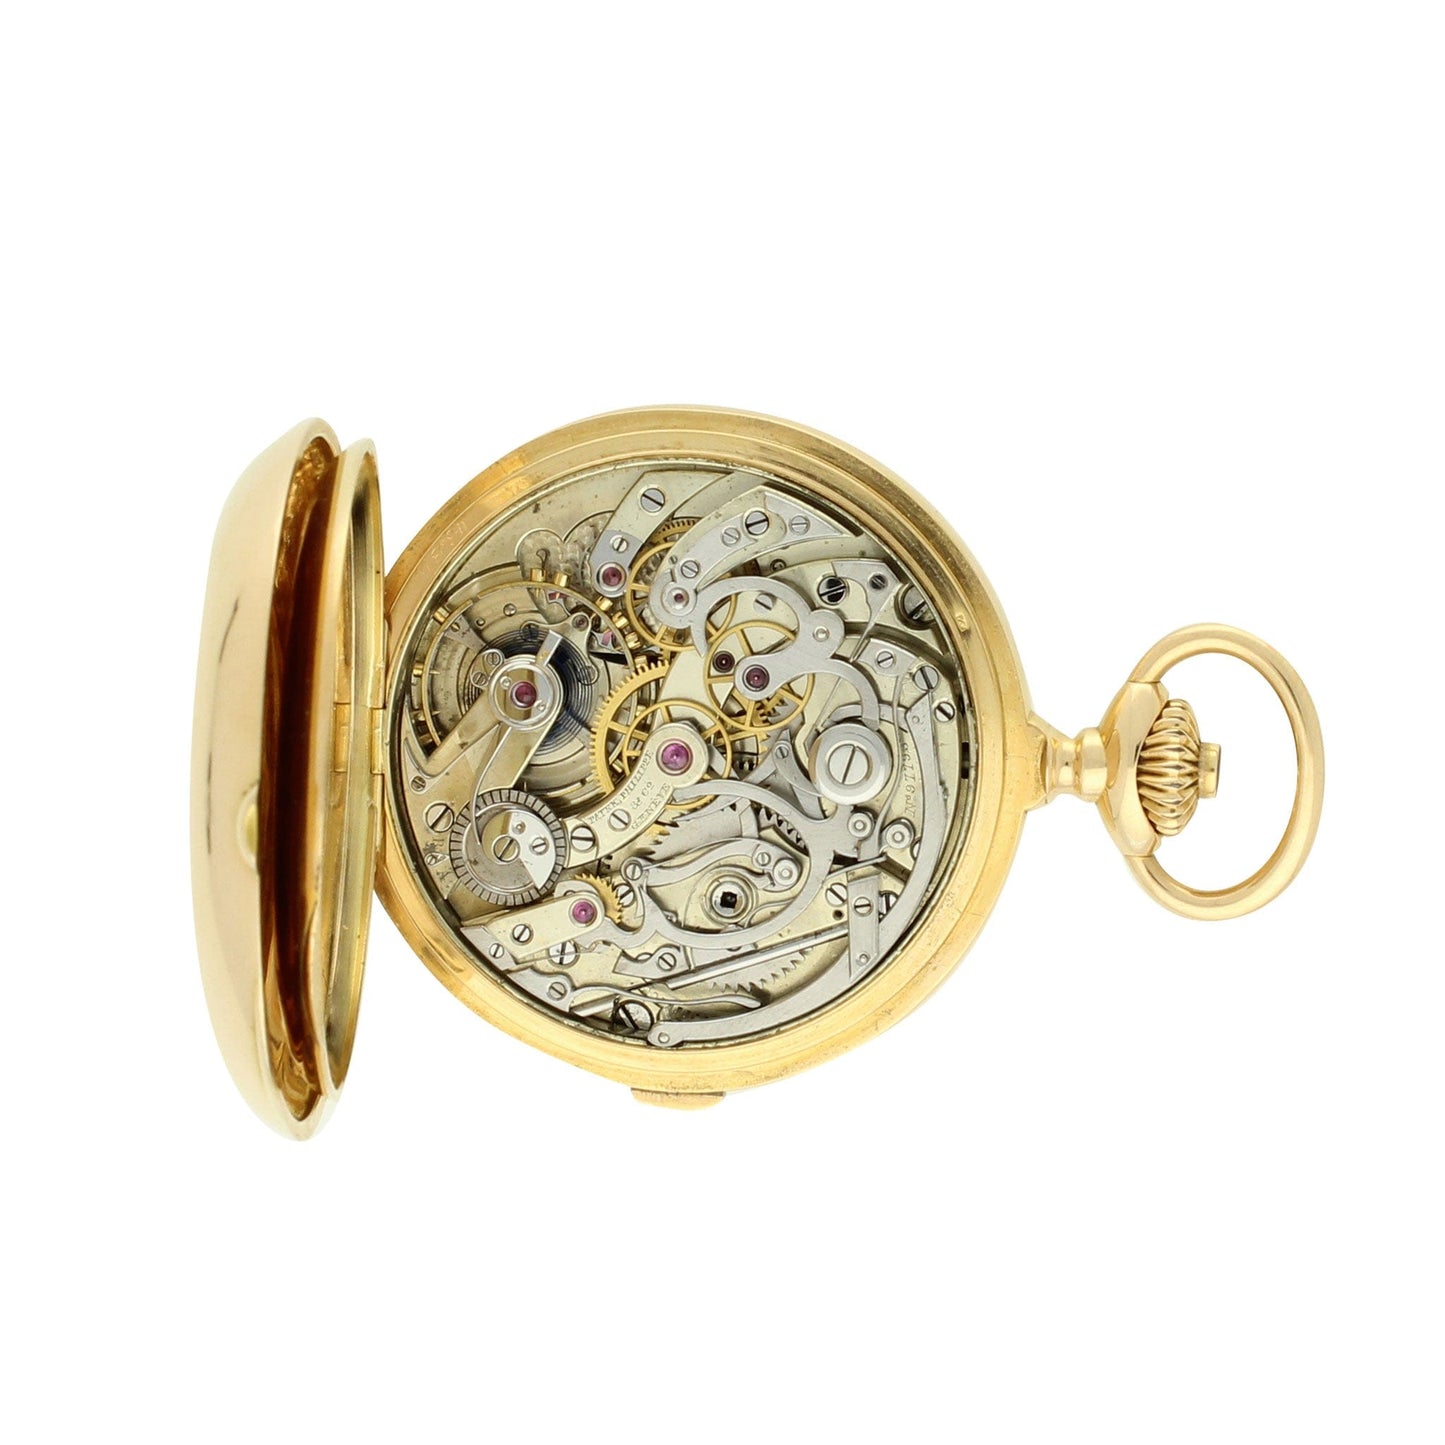 18ct rose gold hunter case chronograph pocket watch. Made 1897